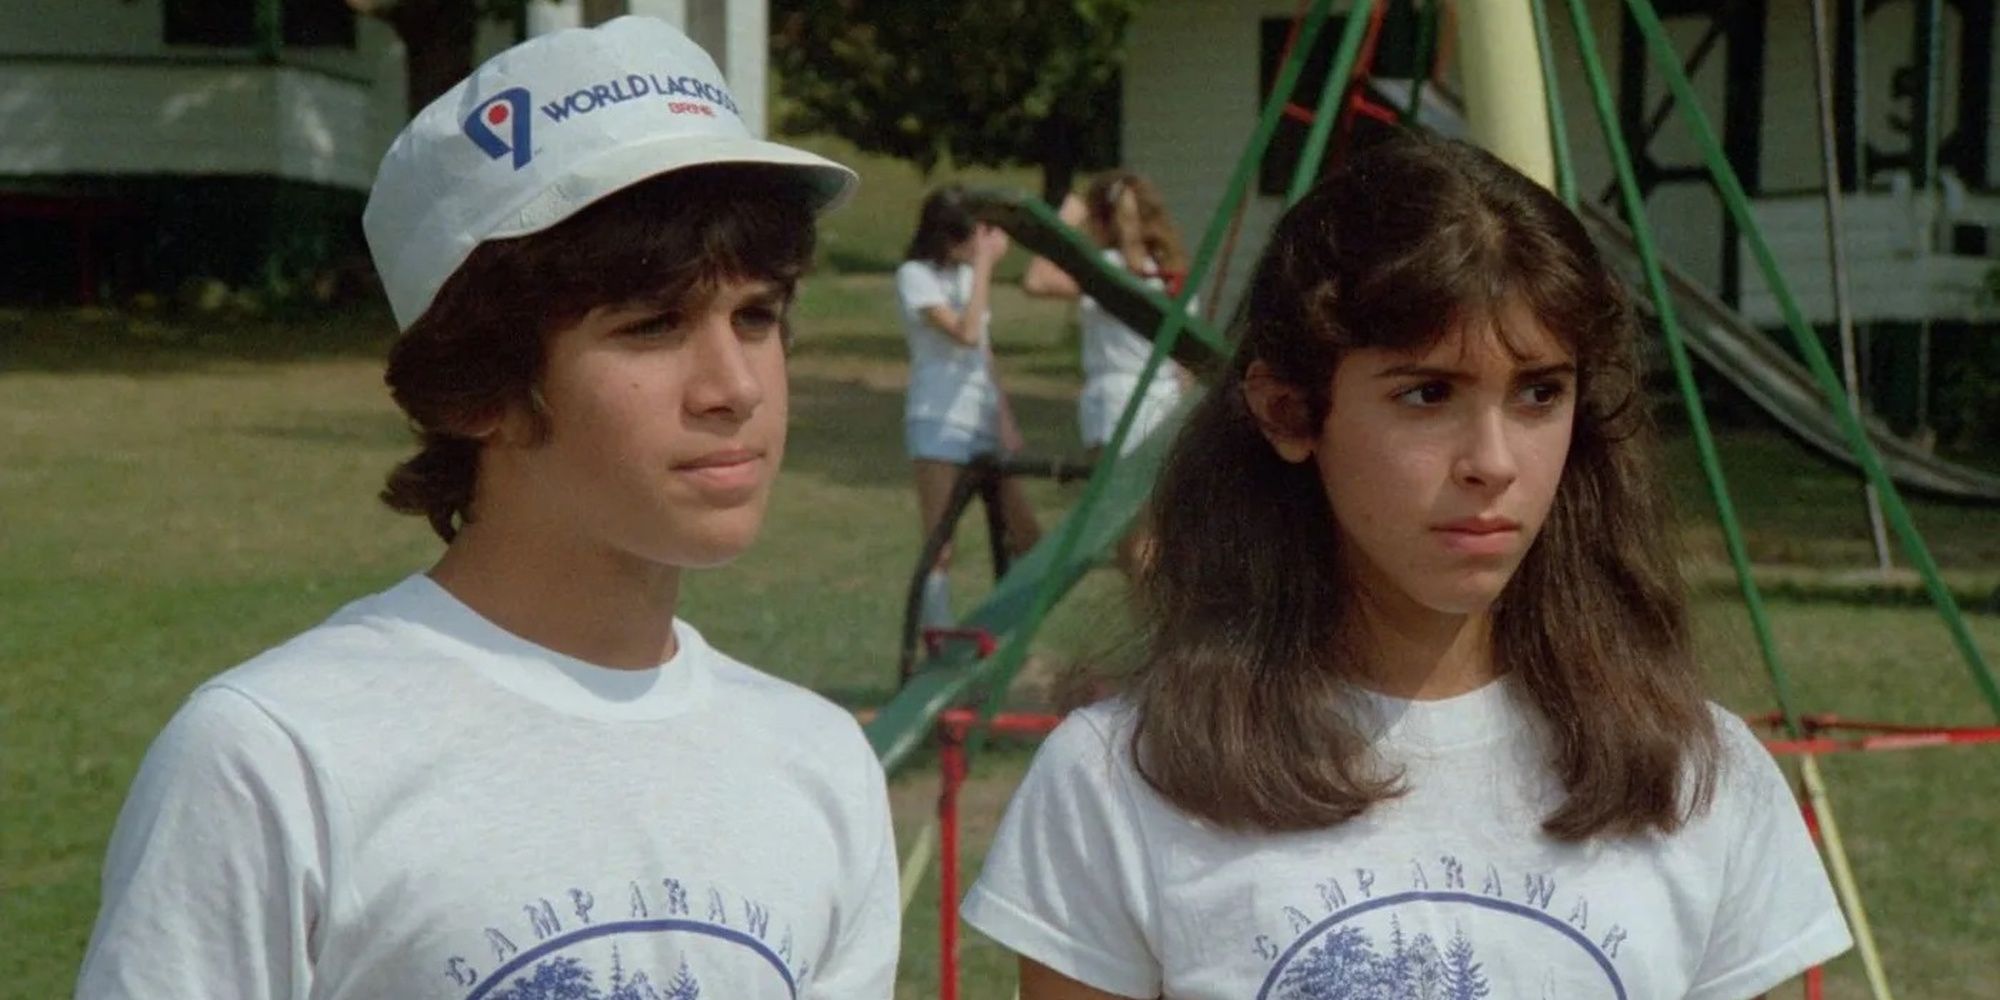 Two young campers in Sleepaway Camp